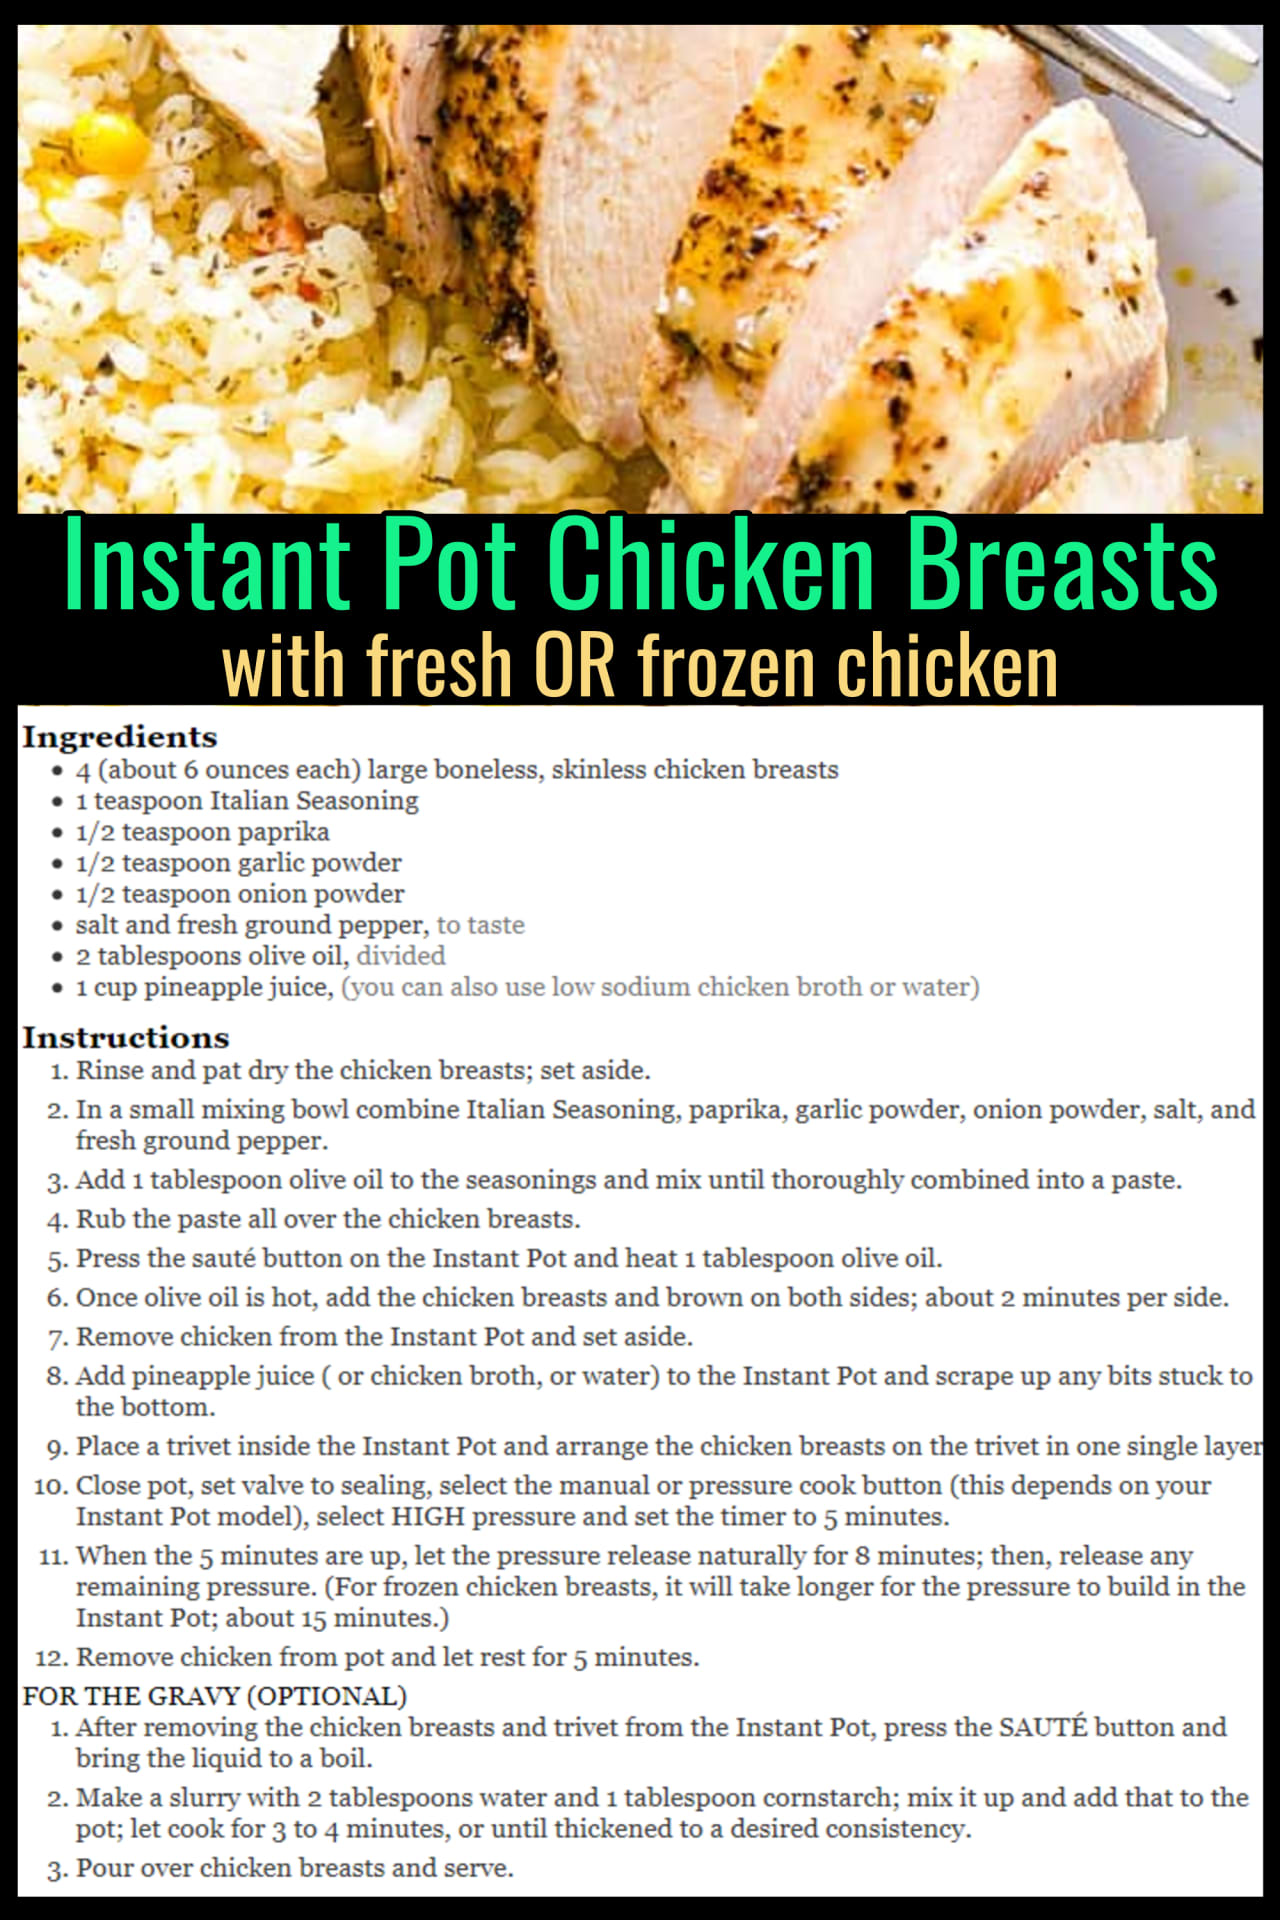 Instant Pot Chicken Recipes For Easy Weeknight Dinners - simple instant pot chicken recipe with FROZEN chicken breasts or fresh - super simple instant pot recipes for beginners and easy meals